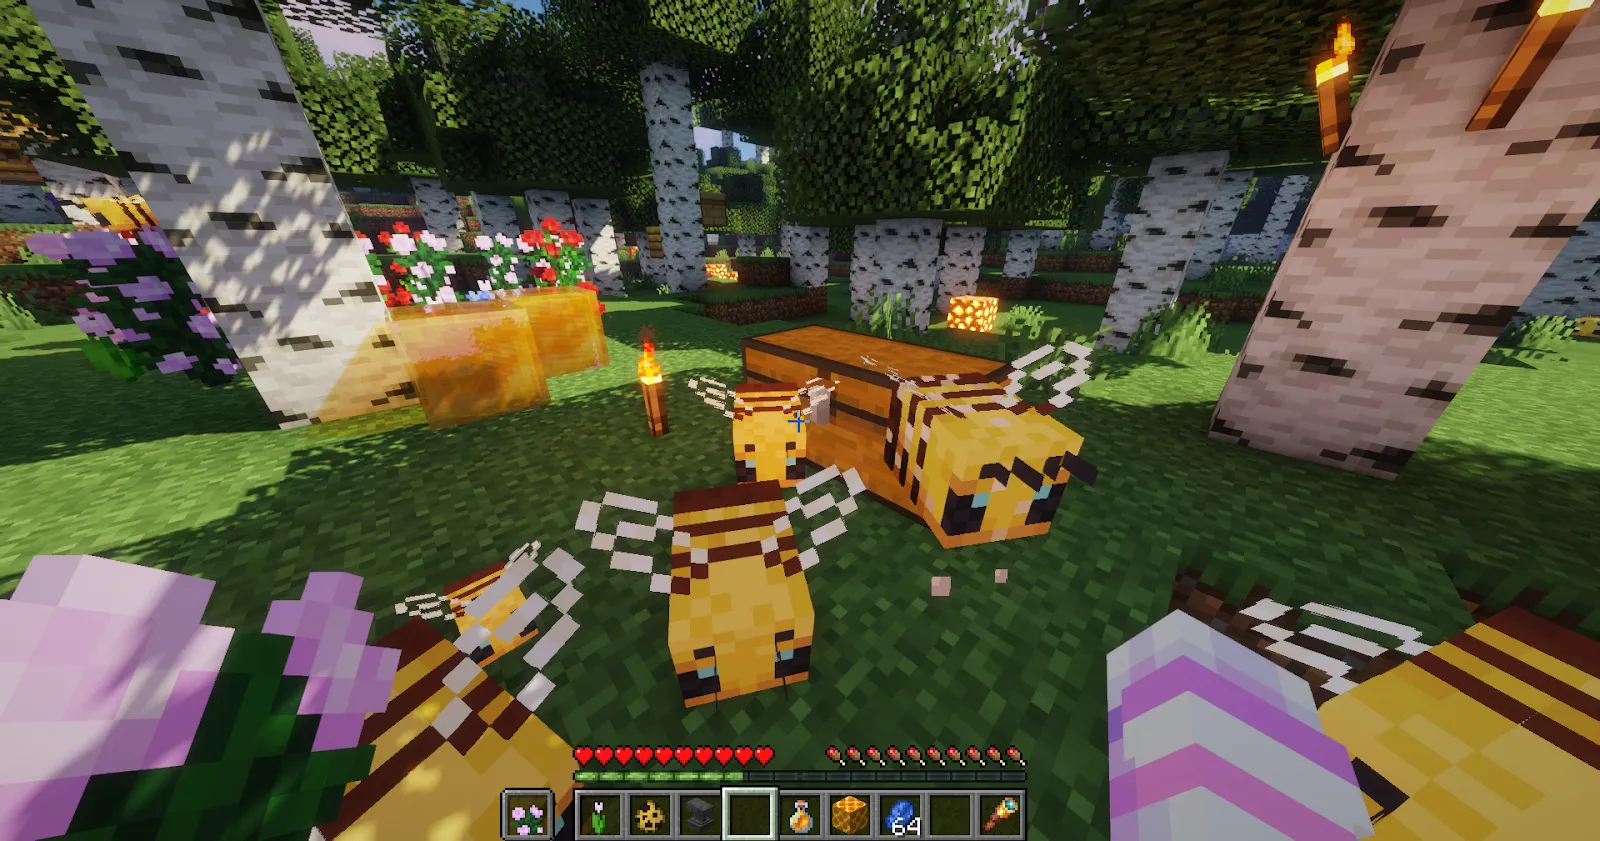 Minecraft Bees in passive mode